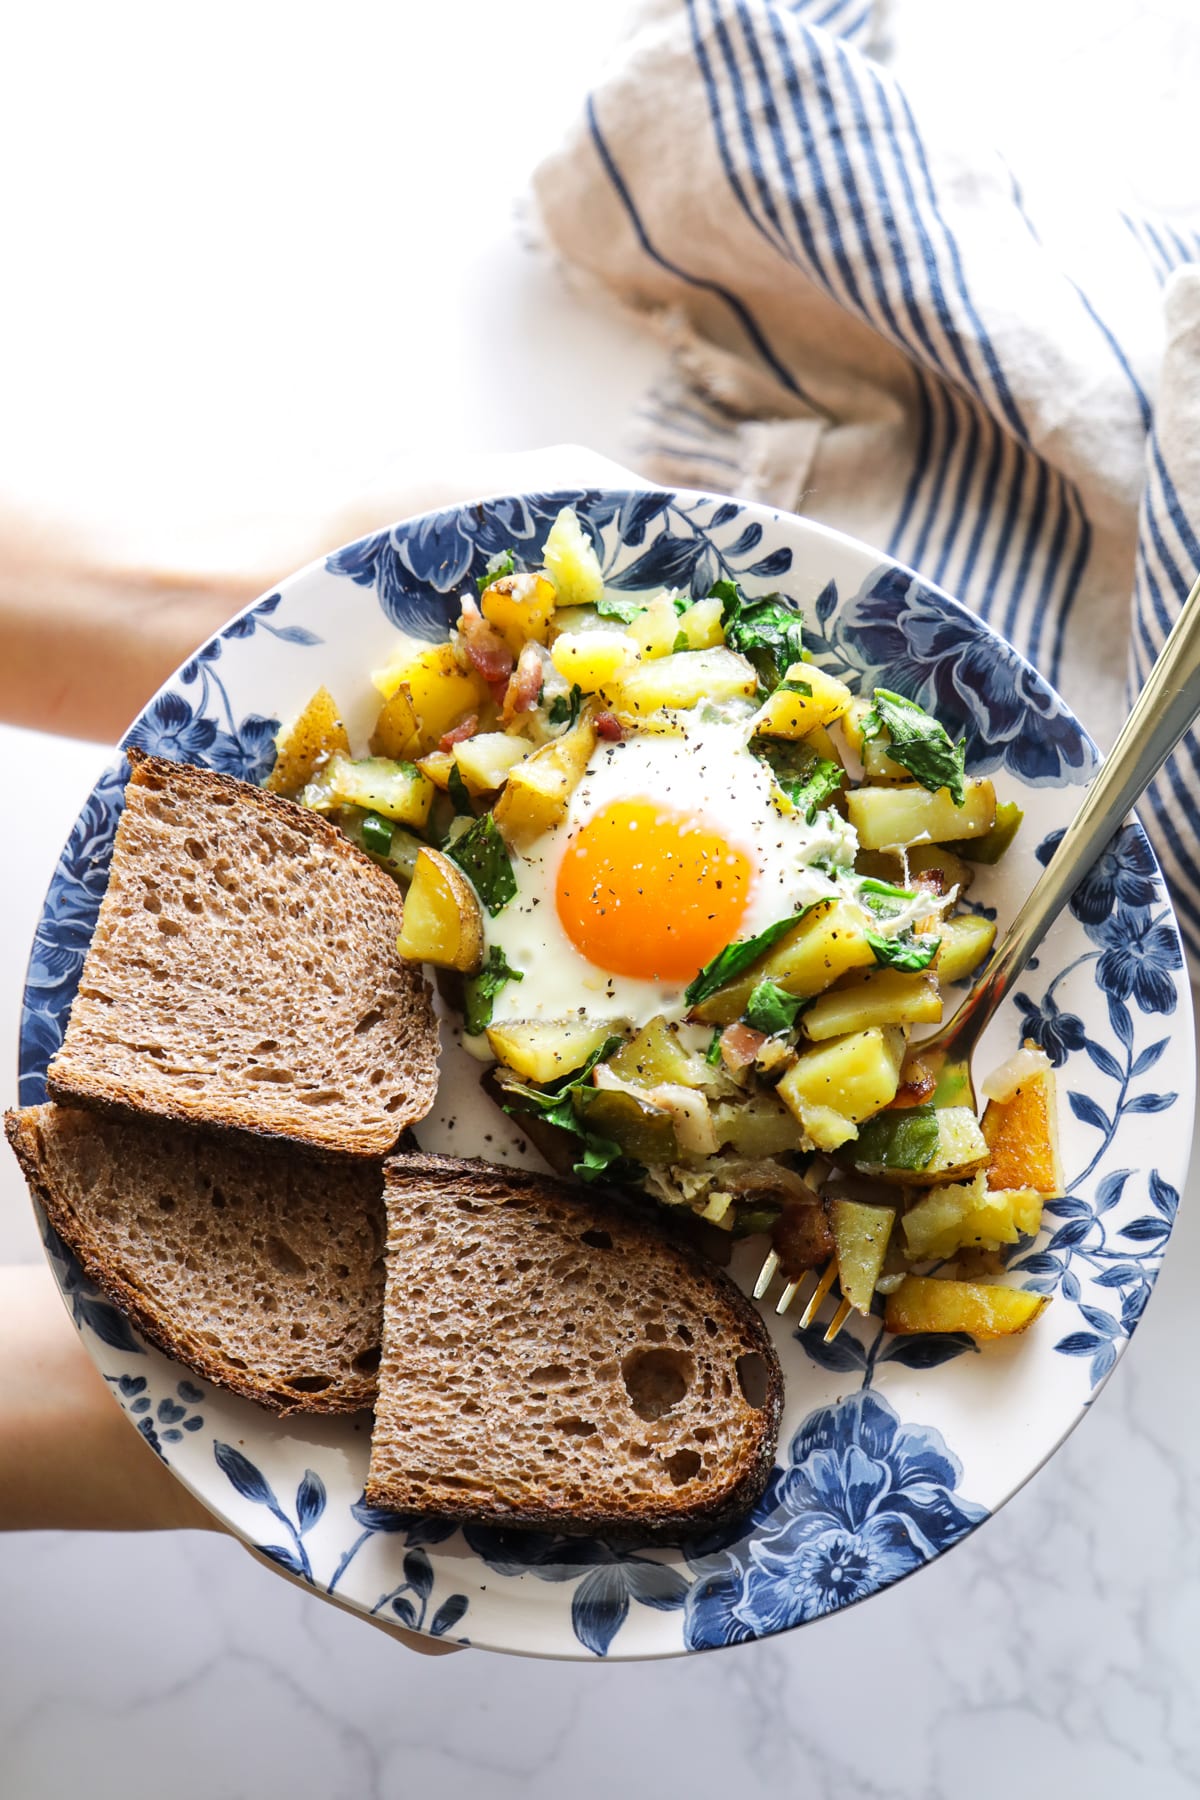 Packed with real food veggies and protein, this homemade hash makes for a nutrient-dense breakfast, brunch, or even brinner (breakfast-for-dinner)!